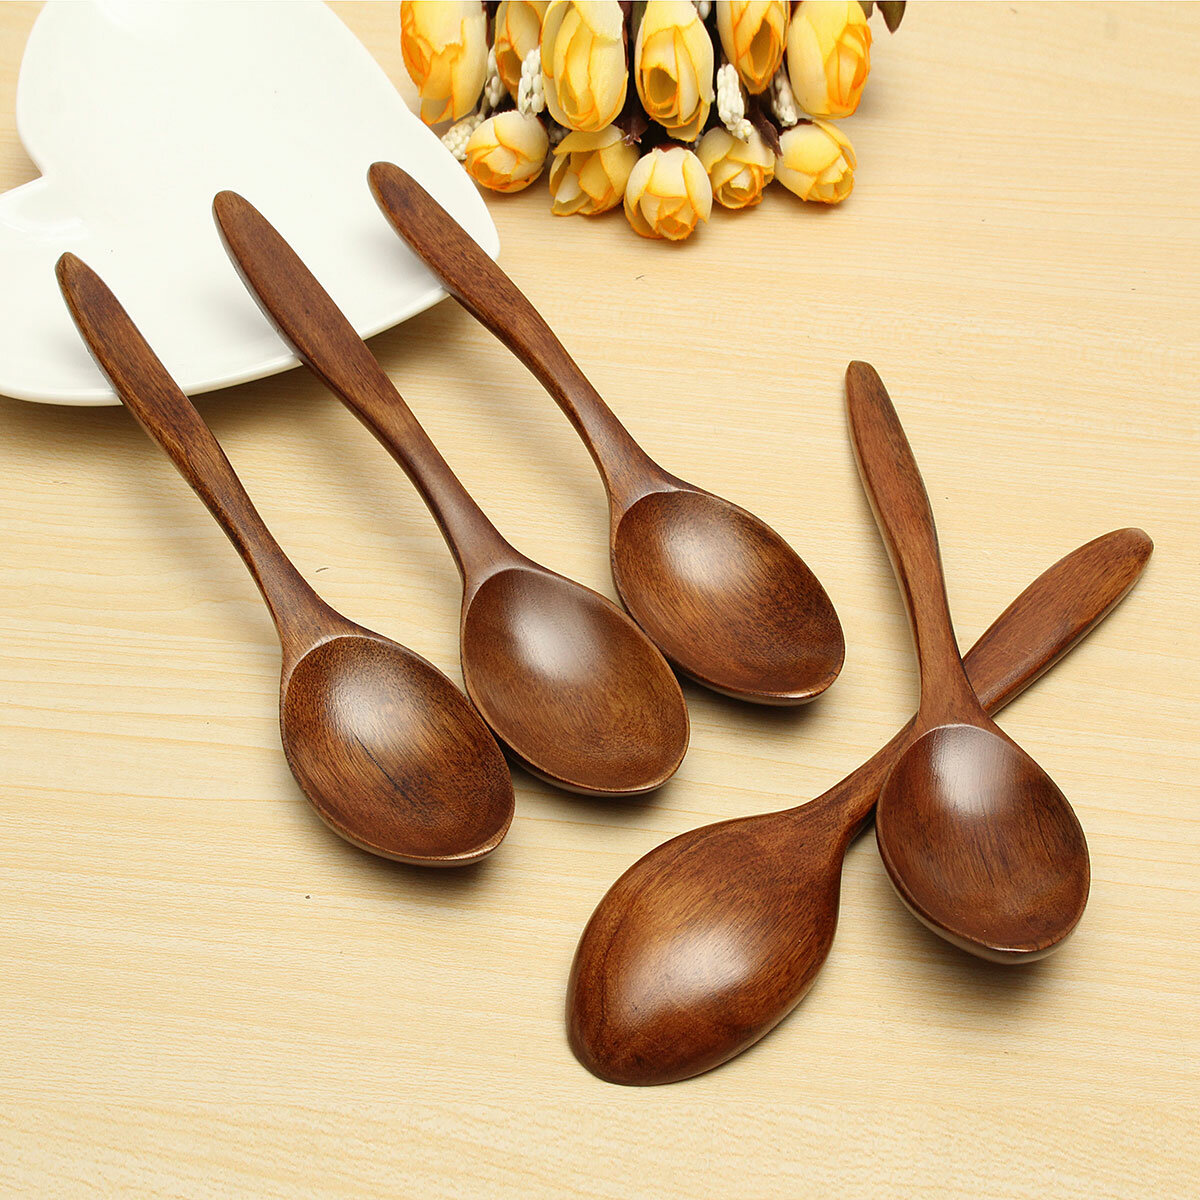 best price,5pcs,wooden,cooking,kitchen,spoon,coupon,price,discount